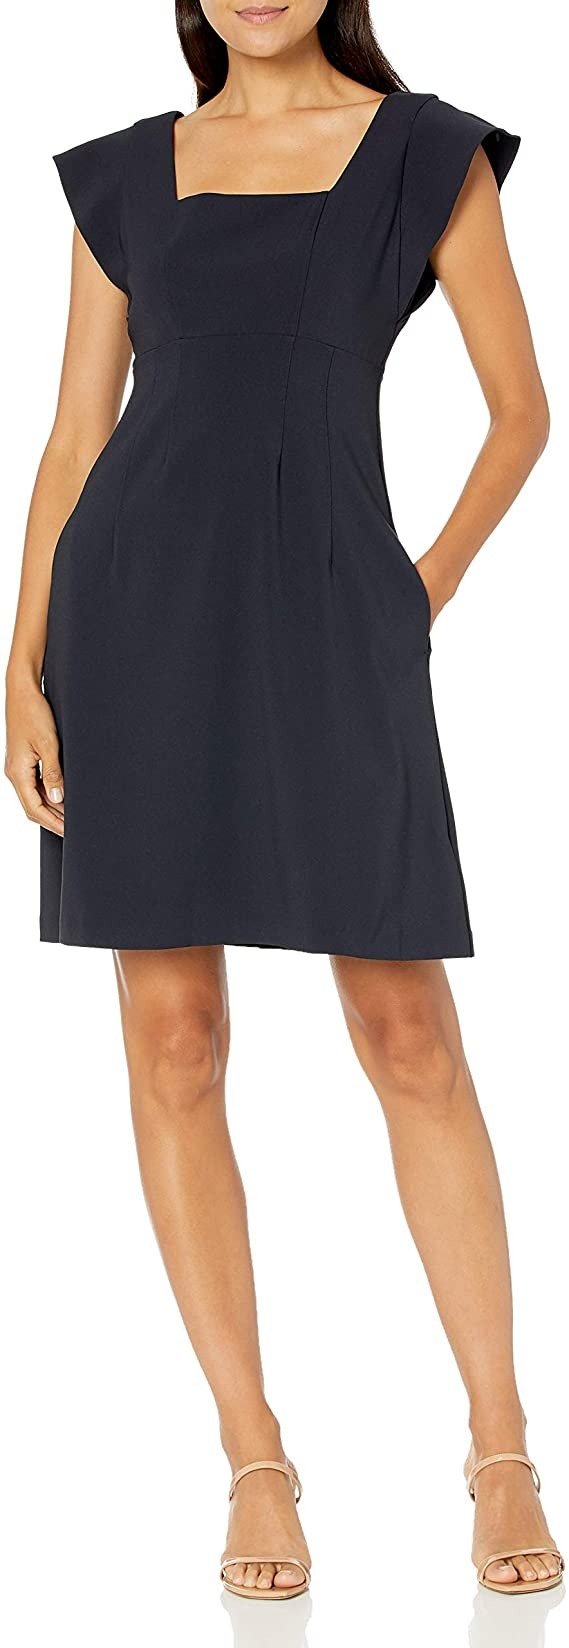 & Ro Women's Stretch Twill Flutter Sleeve Square Neck Fit and Flare Dress